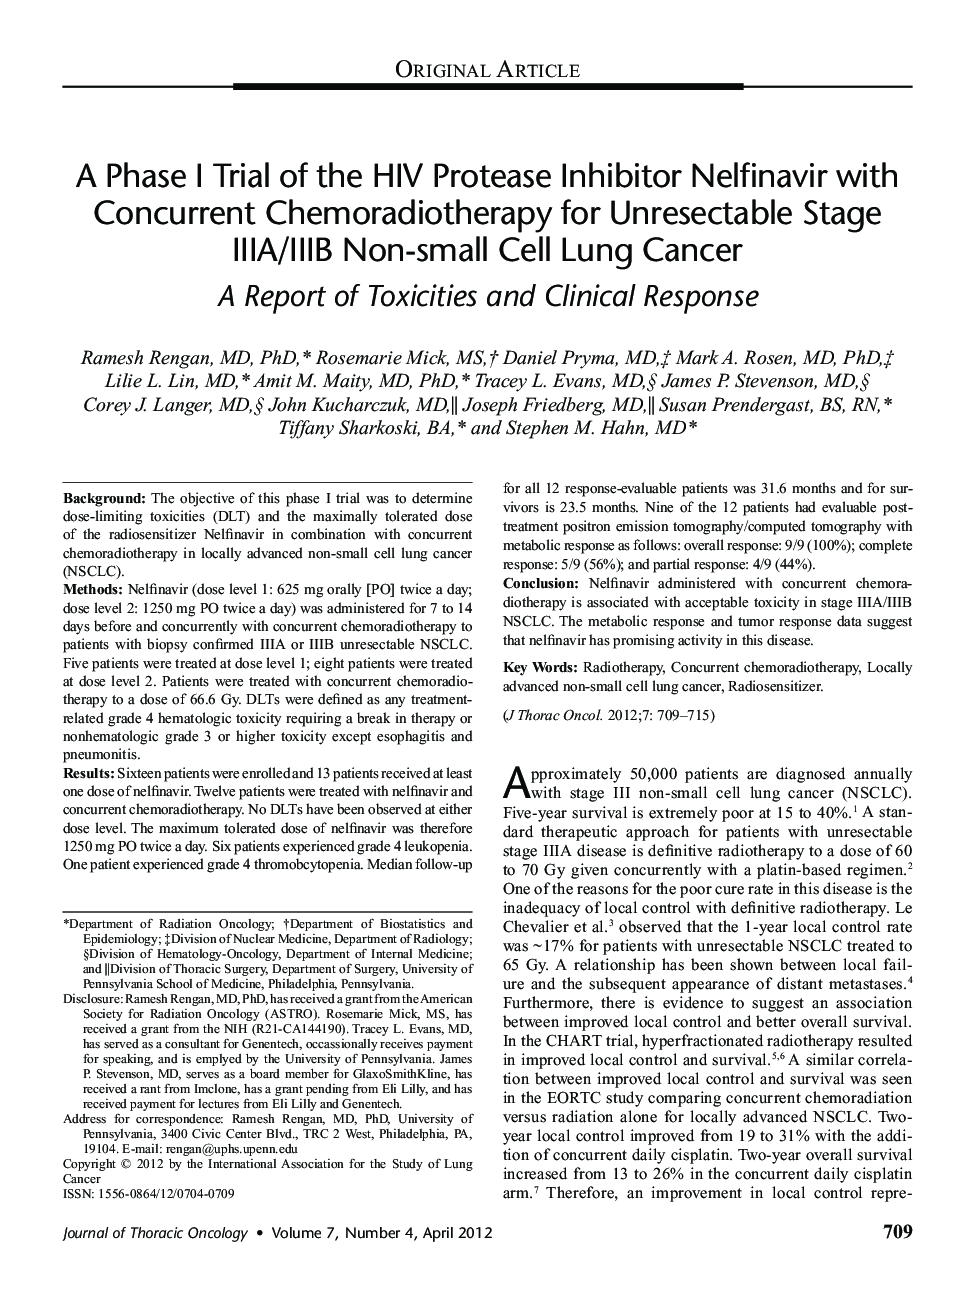 A Phase I Trial of the HIV Protease Inhibitor Nelfinavir with Concurrent Chemoradiotherapy for Unresectable Stage IIIA/IIIB Non-small Cell Lung Cancer: A Report of Toxicities and Clinical Response 